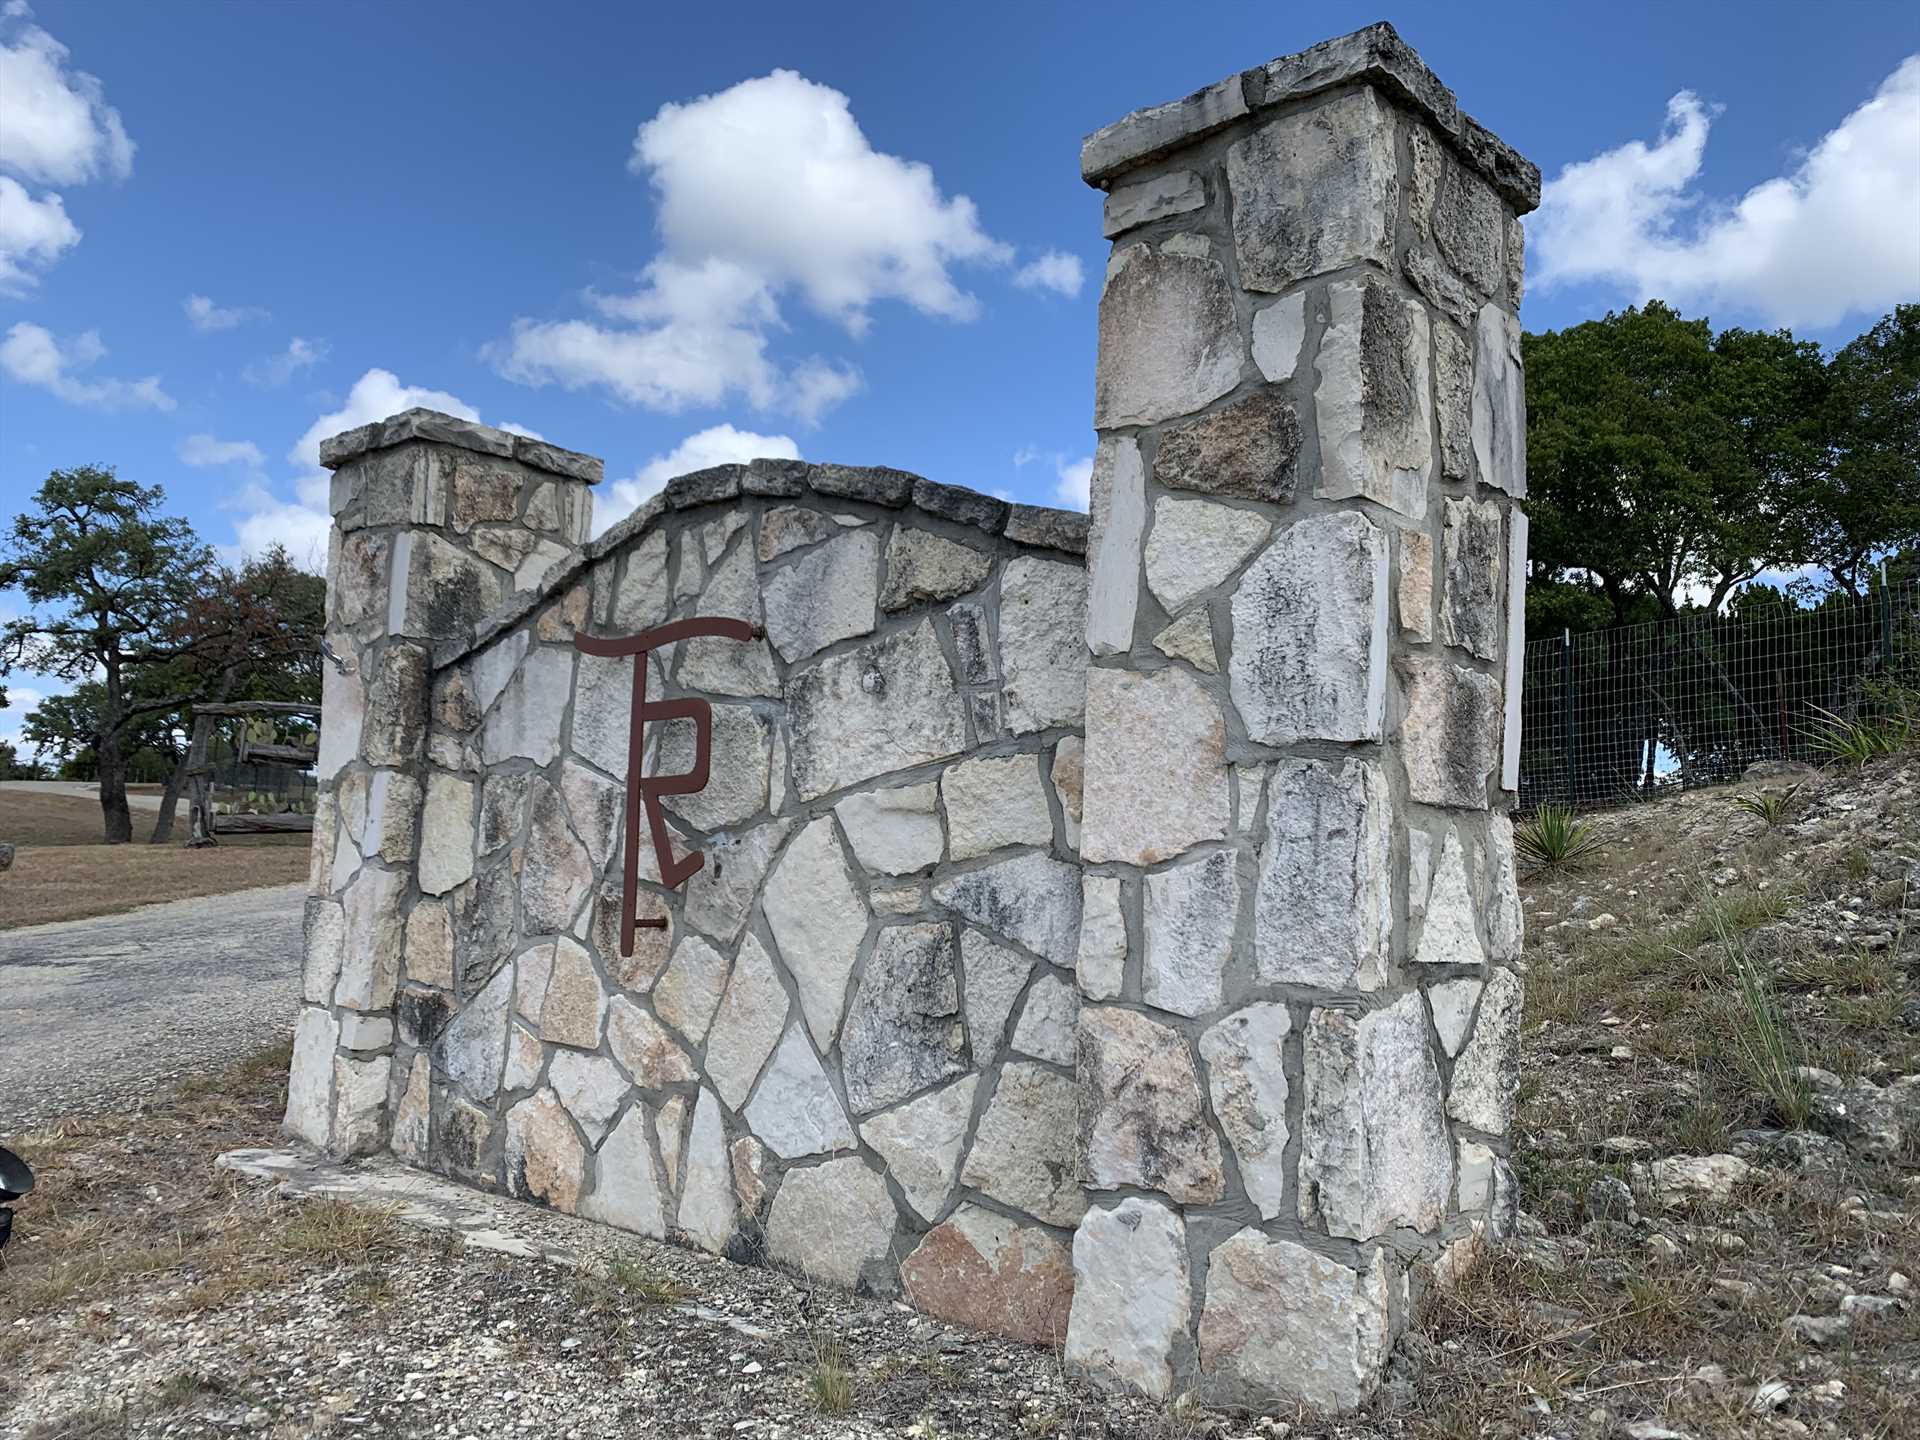                                                 This stone gate on the road marks Tabasco Ranch, and serves as your gateway to a wonderful Hill Country holiday!